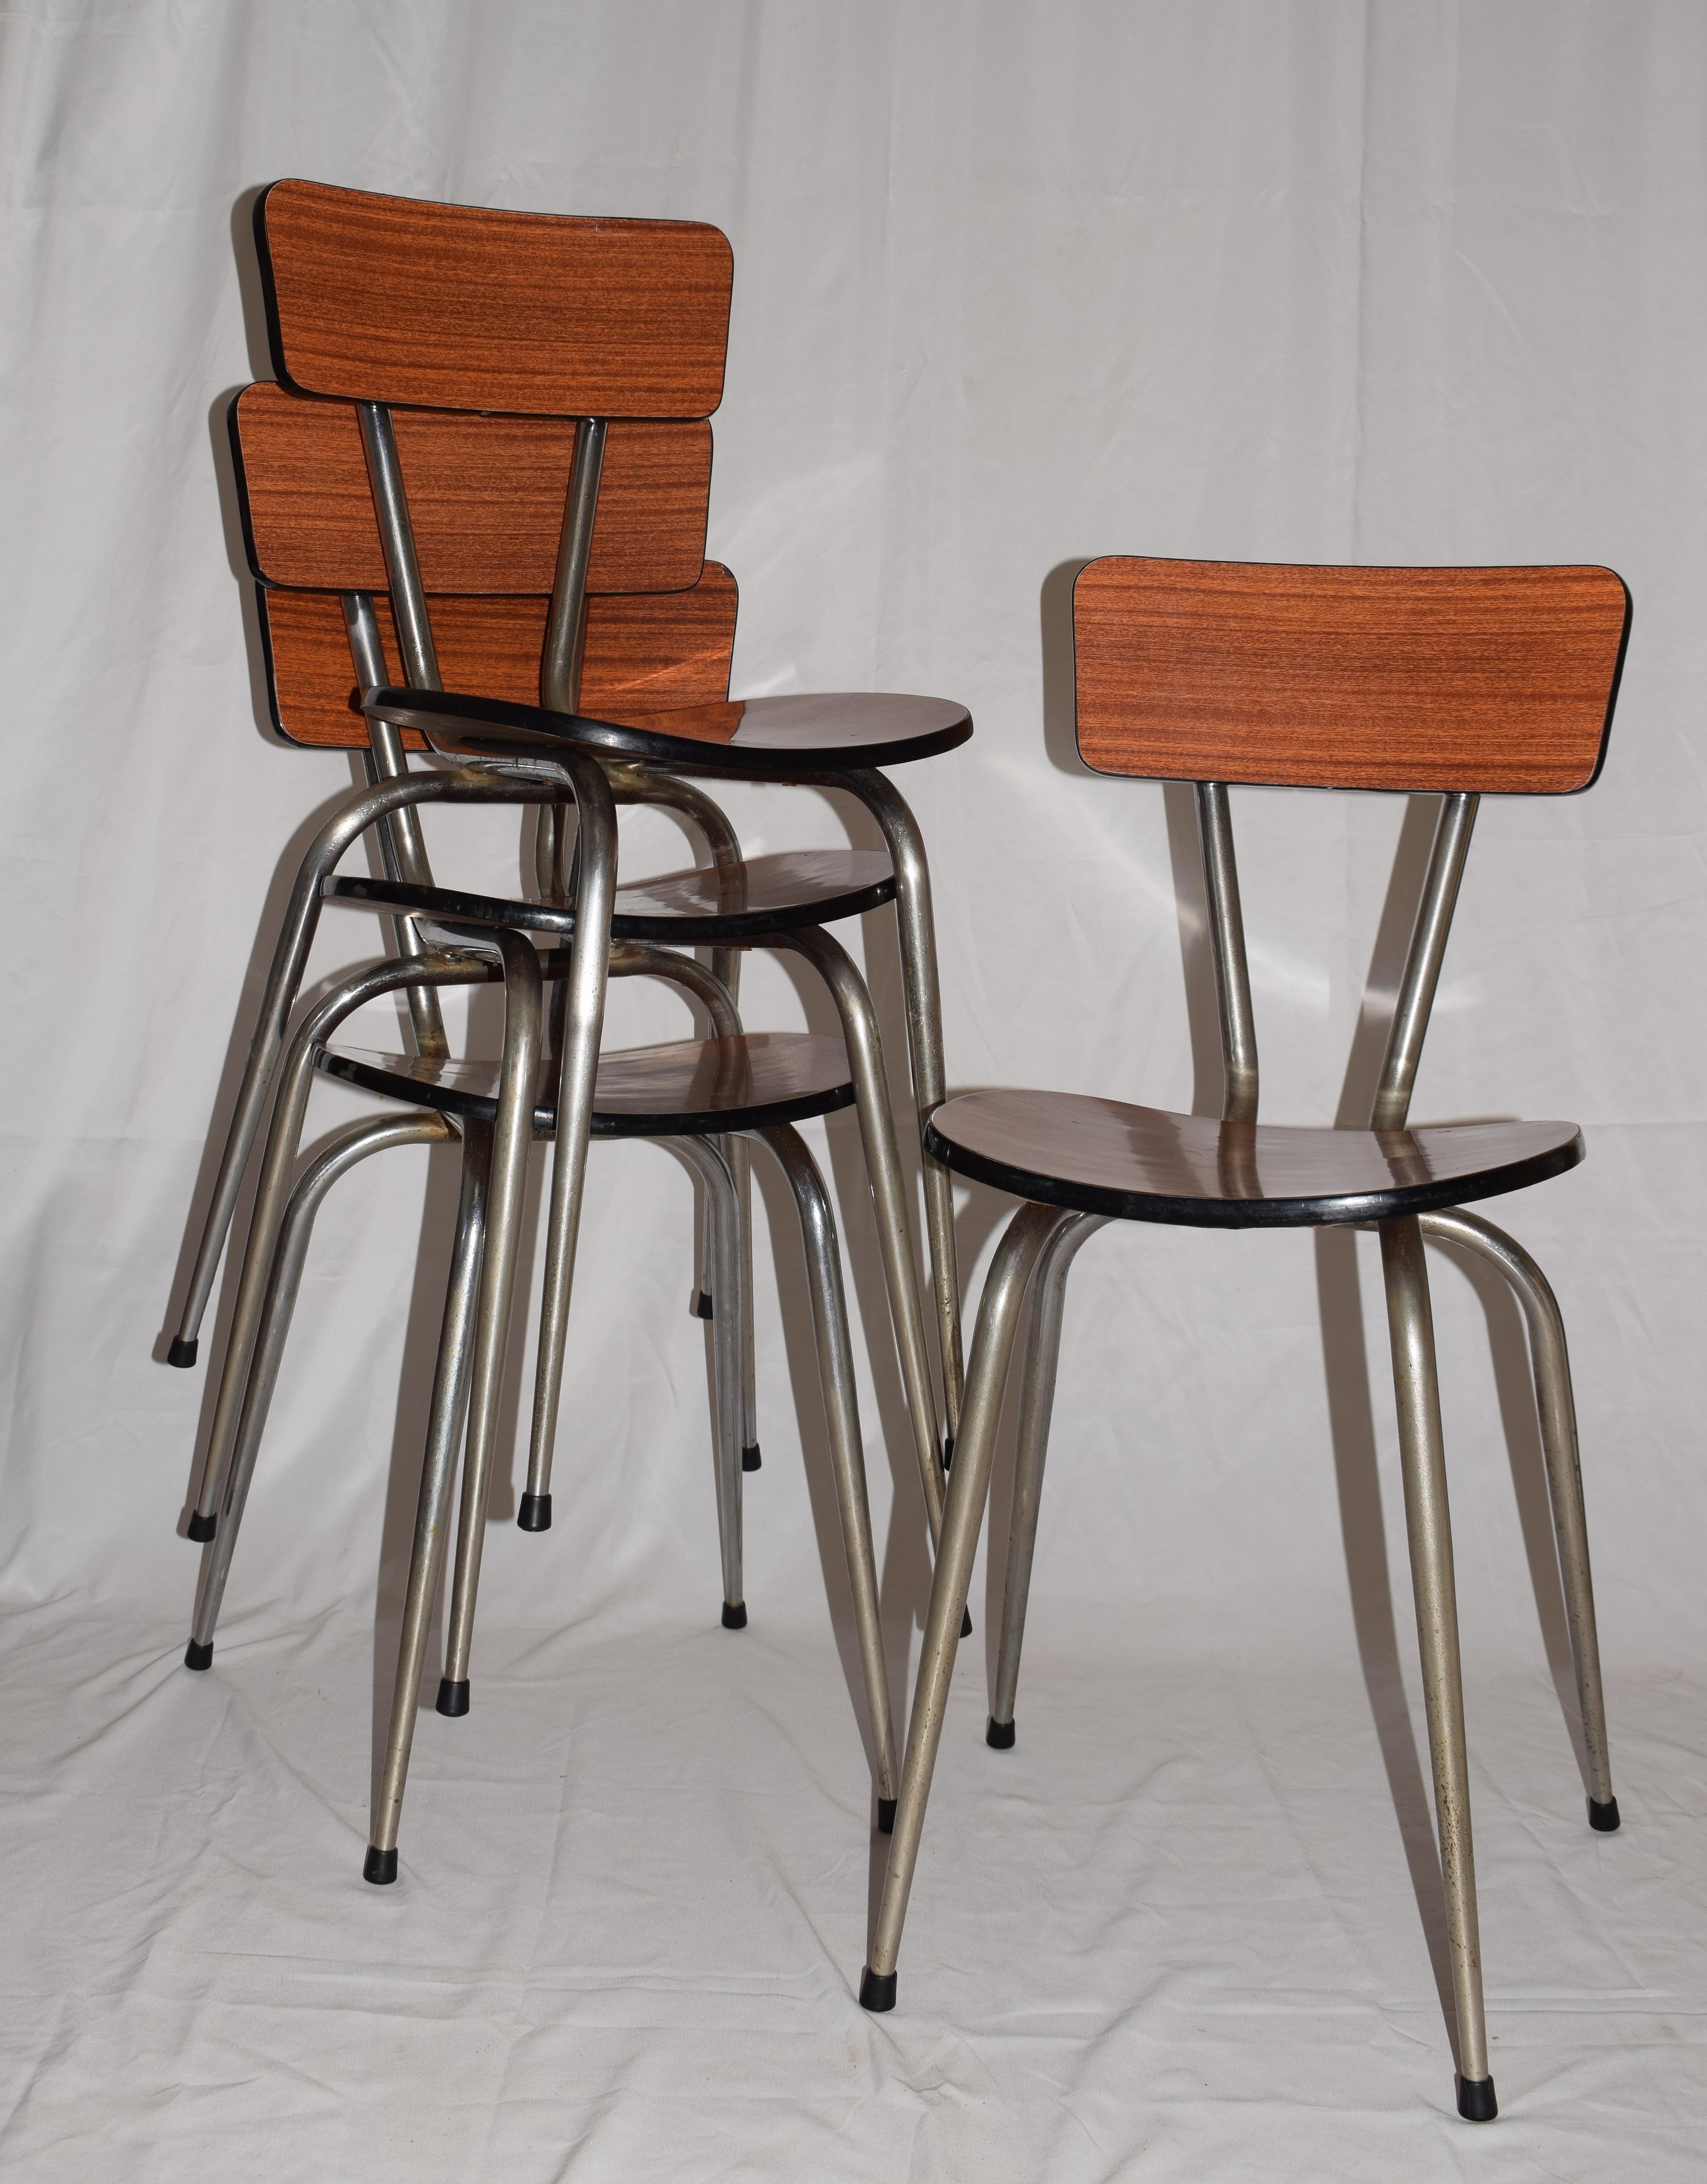 1960s formica kitchen table and chairs for sale